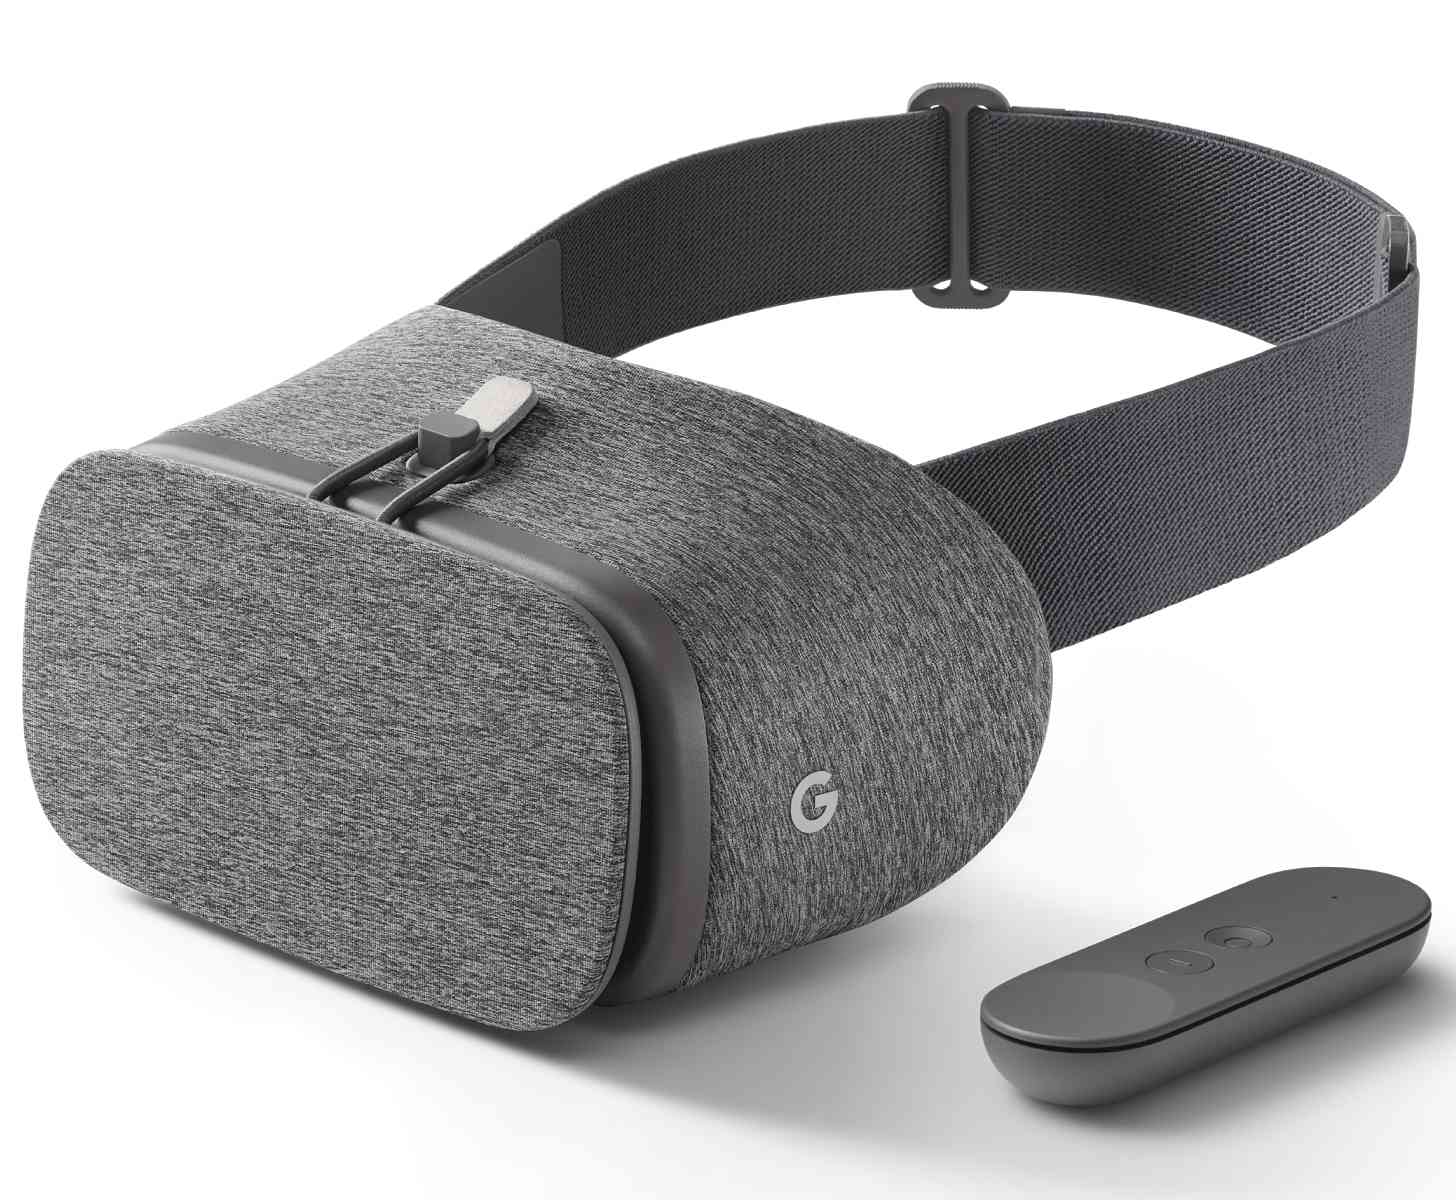 Google Daydream View VR headset controller official